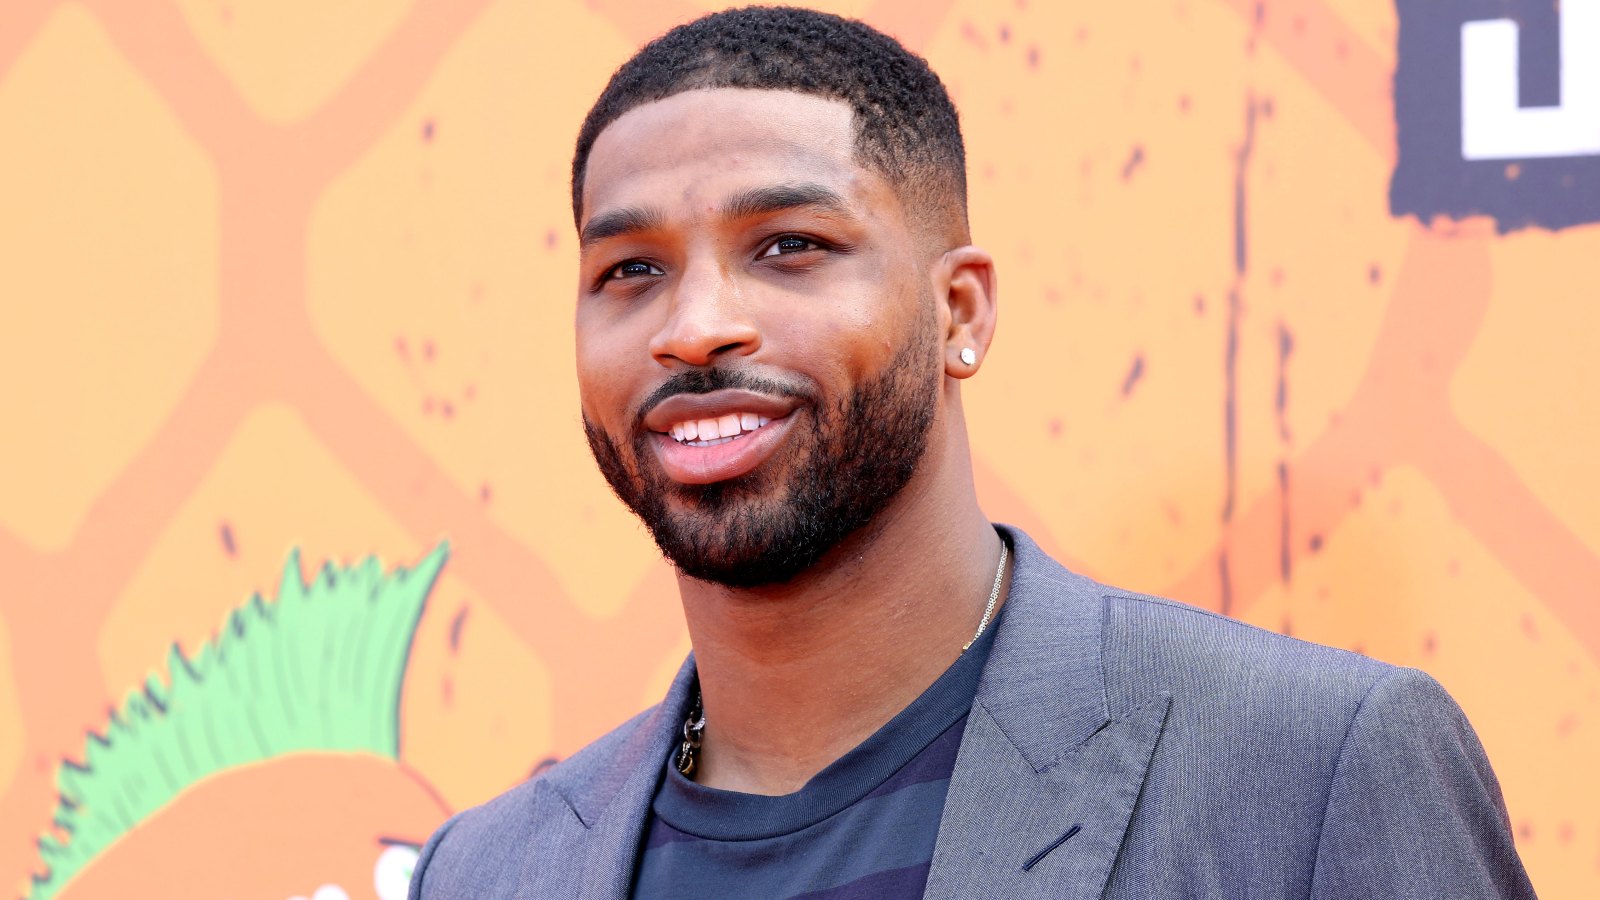 Tristan Thompson Shares Rare Social Media Post About Daughter True